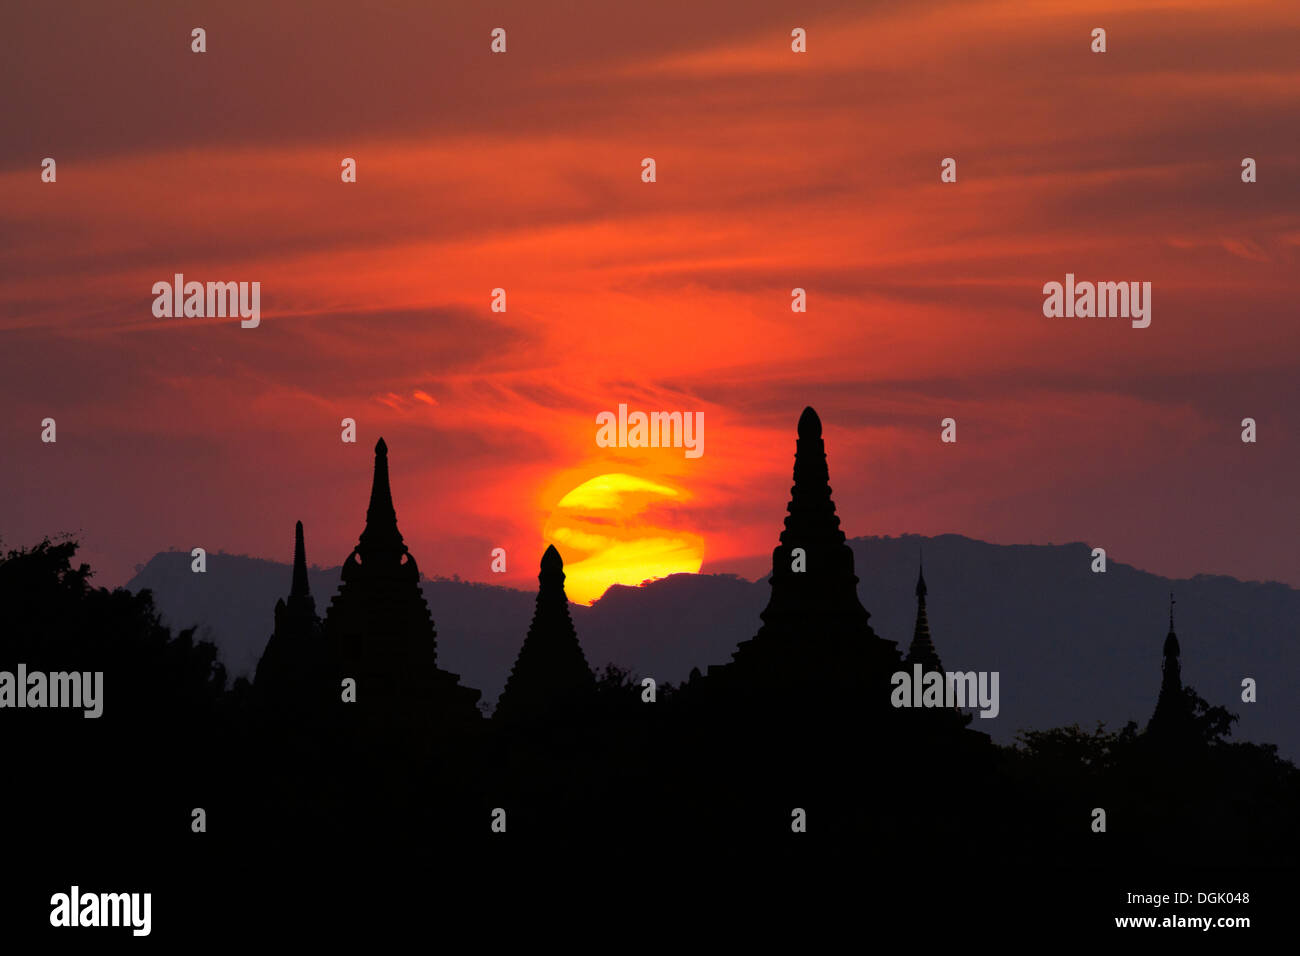 Sunset over the stupas and pagodas of Bagan in Myanmar. Stock Photo